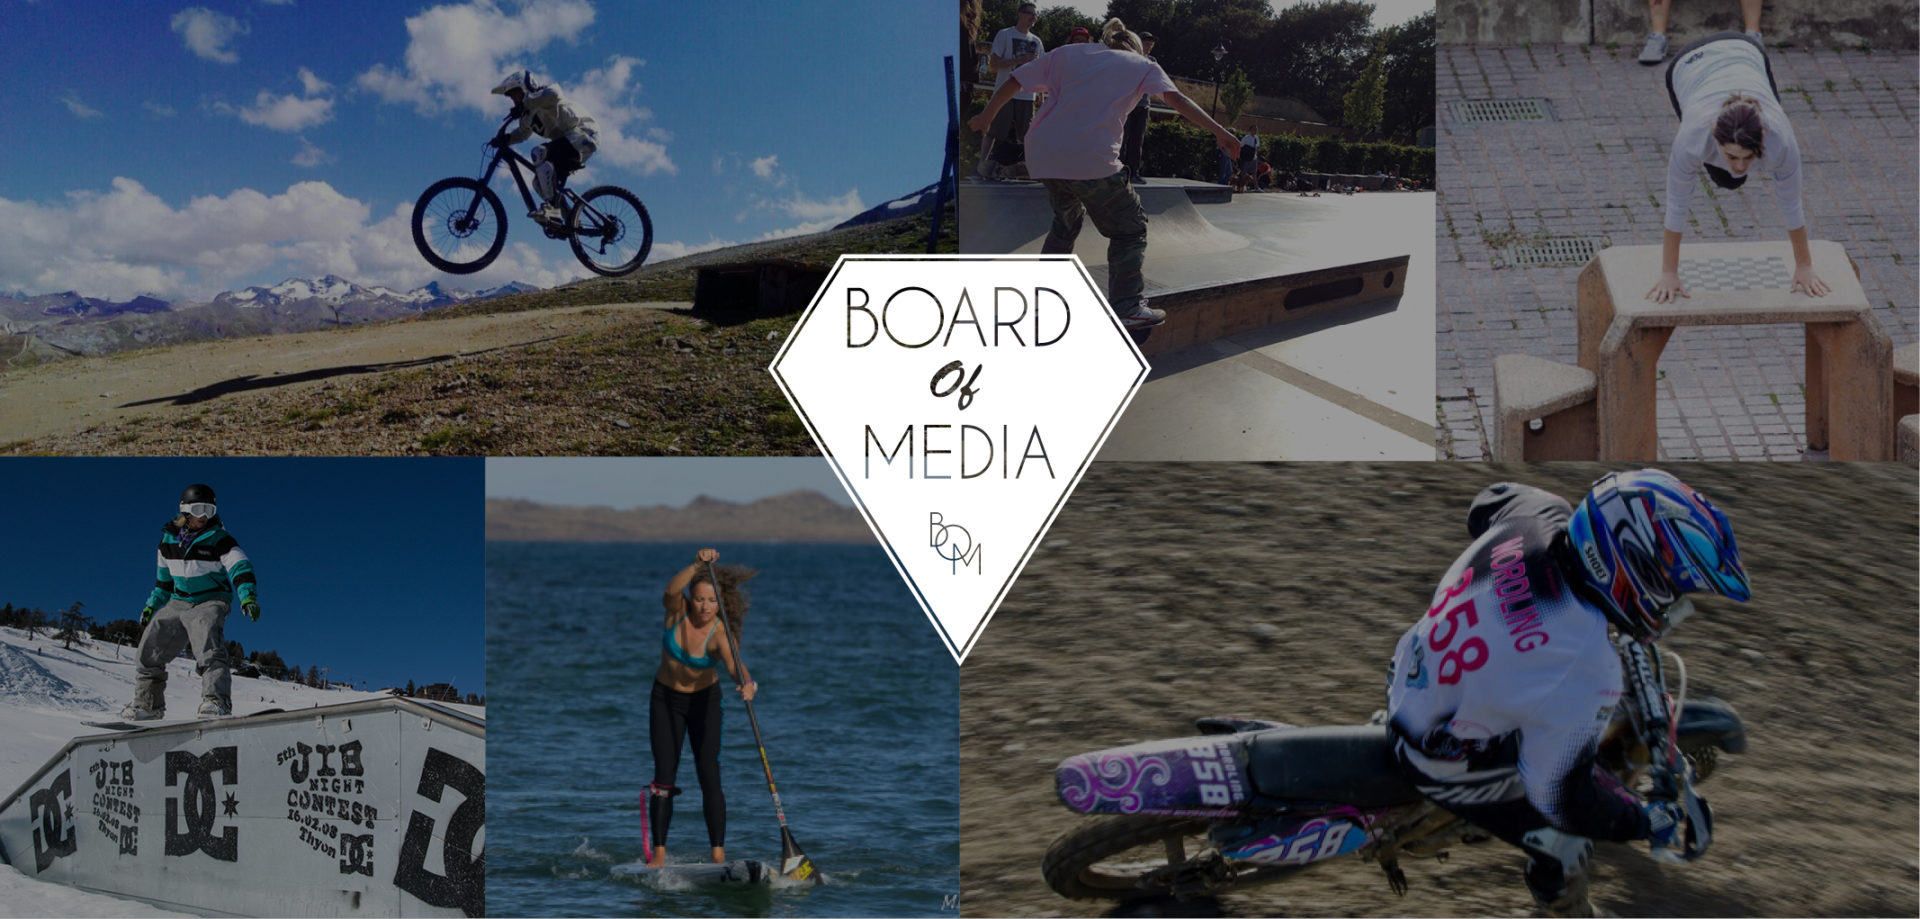 Board of Media – Raising awareness of the inequality in Action Sports